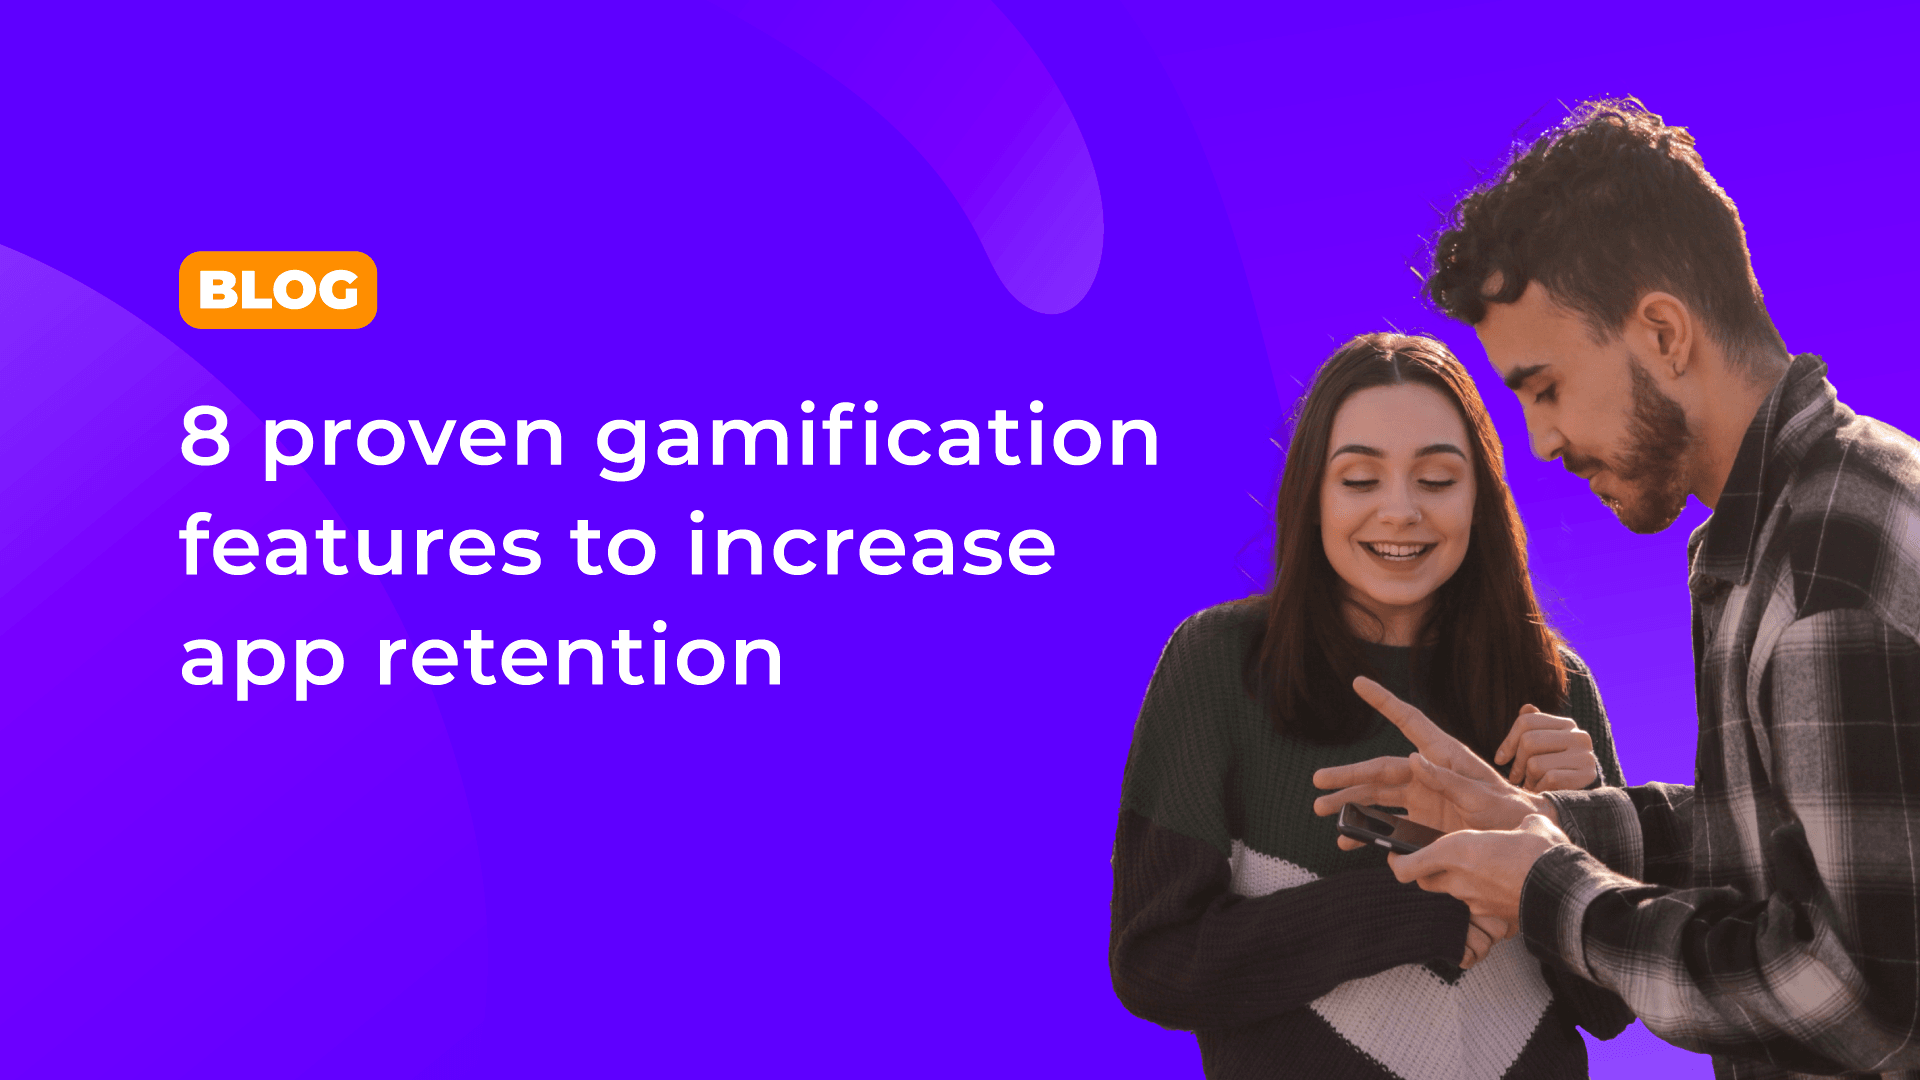 How to increase app retention? Use these 8 proven gamification features!